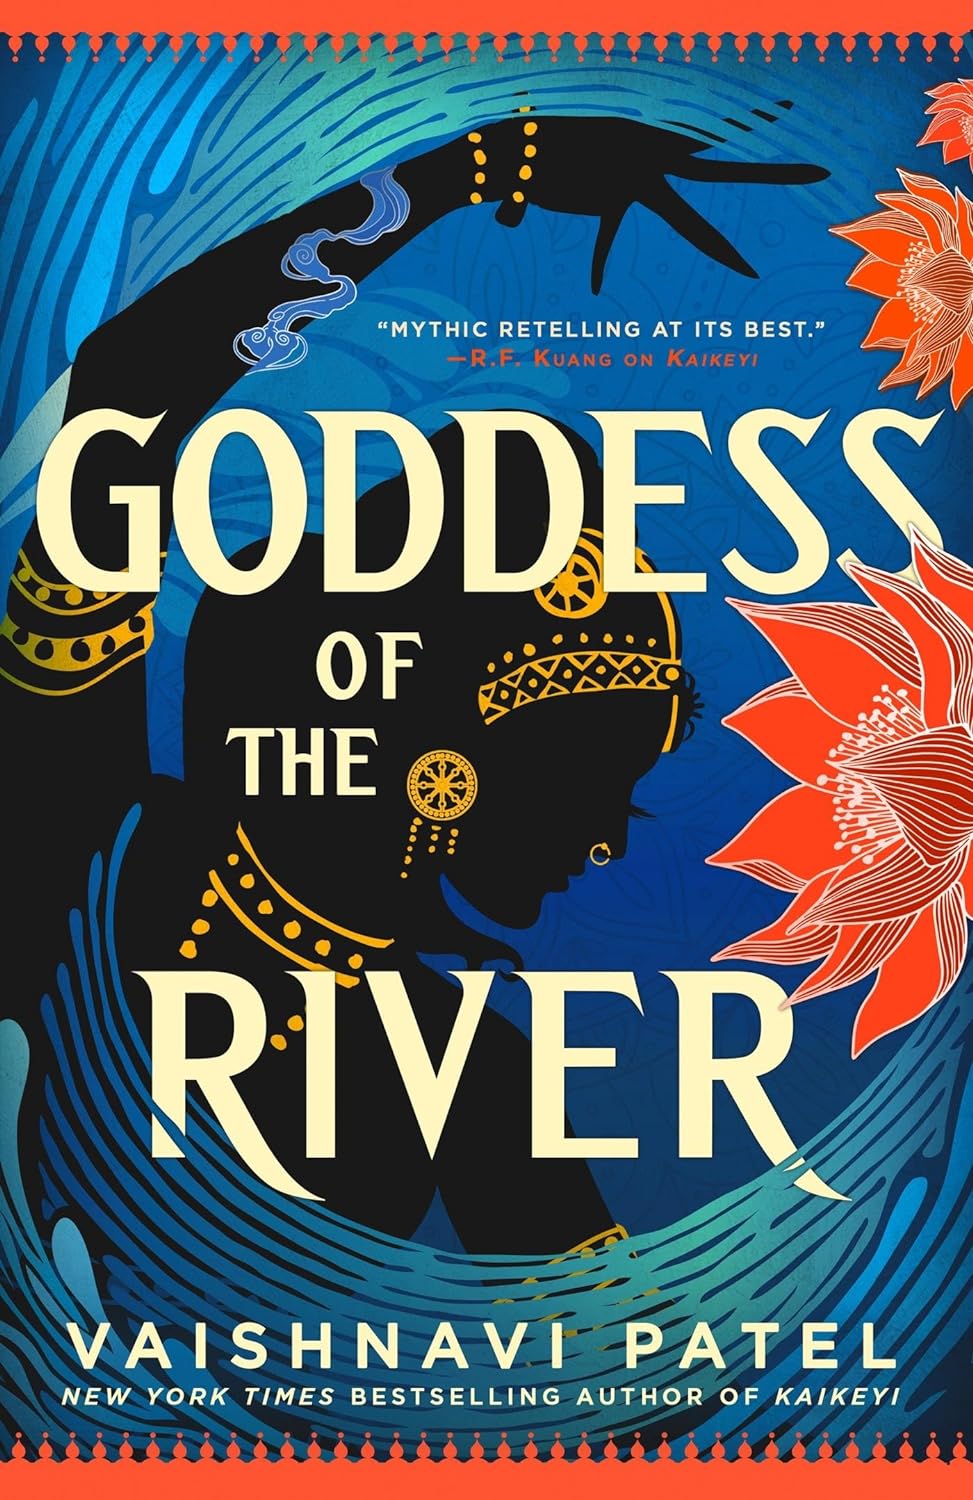 cover of Goddess of the River by Vaishnavi Patel